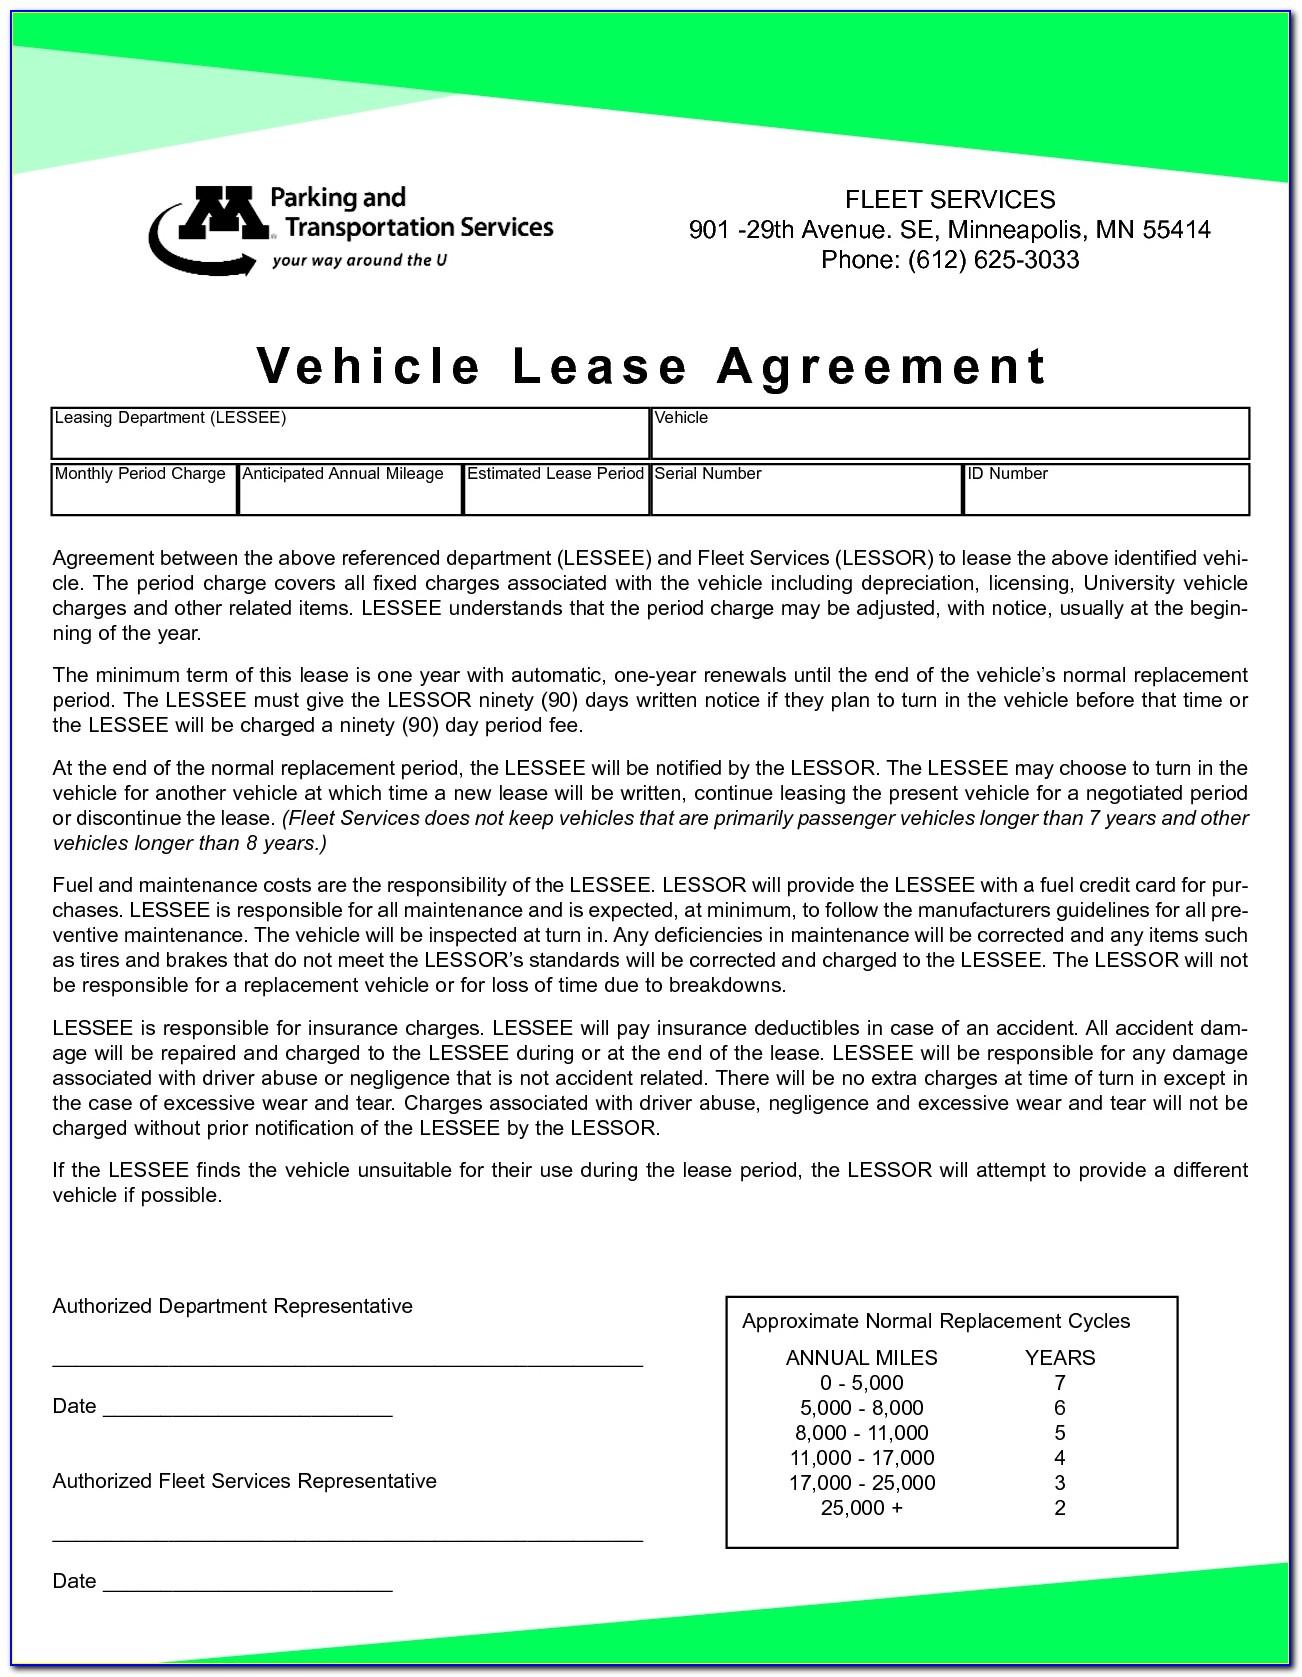 Vehicle Lease Contracts